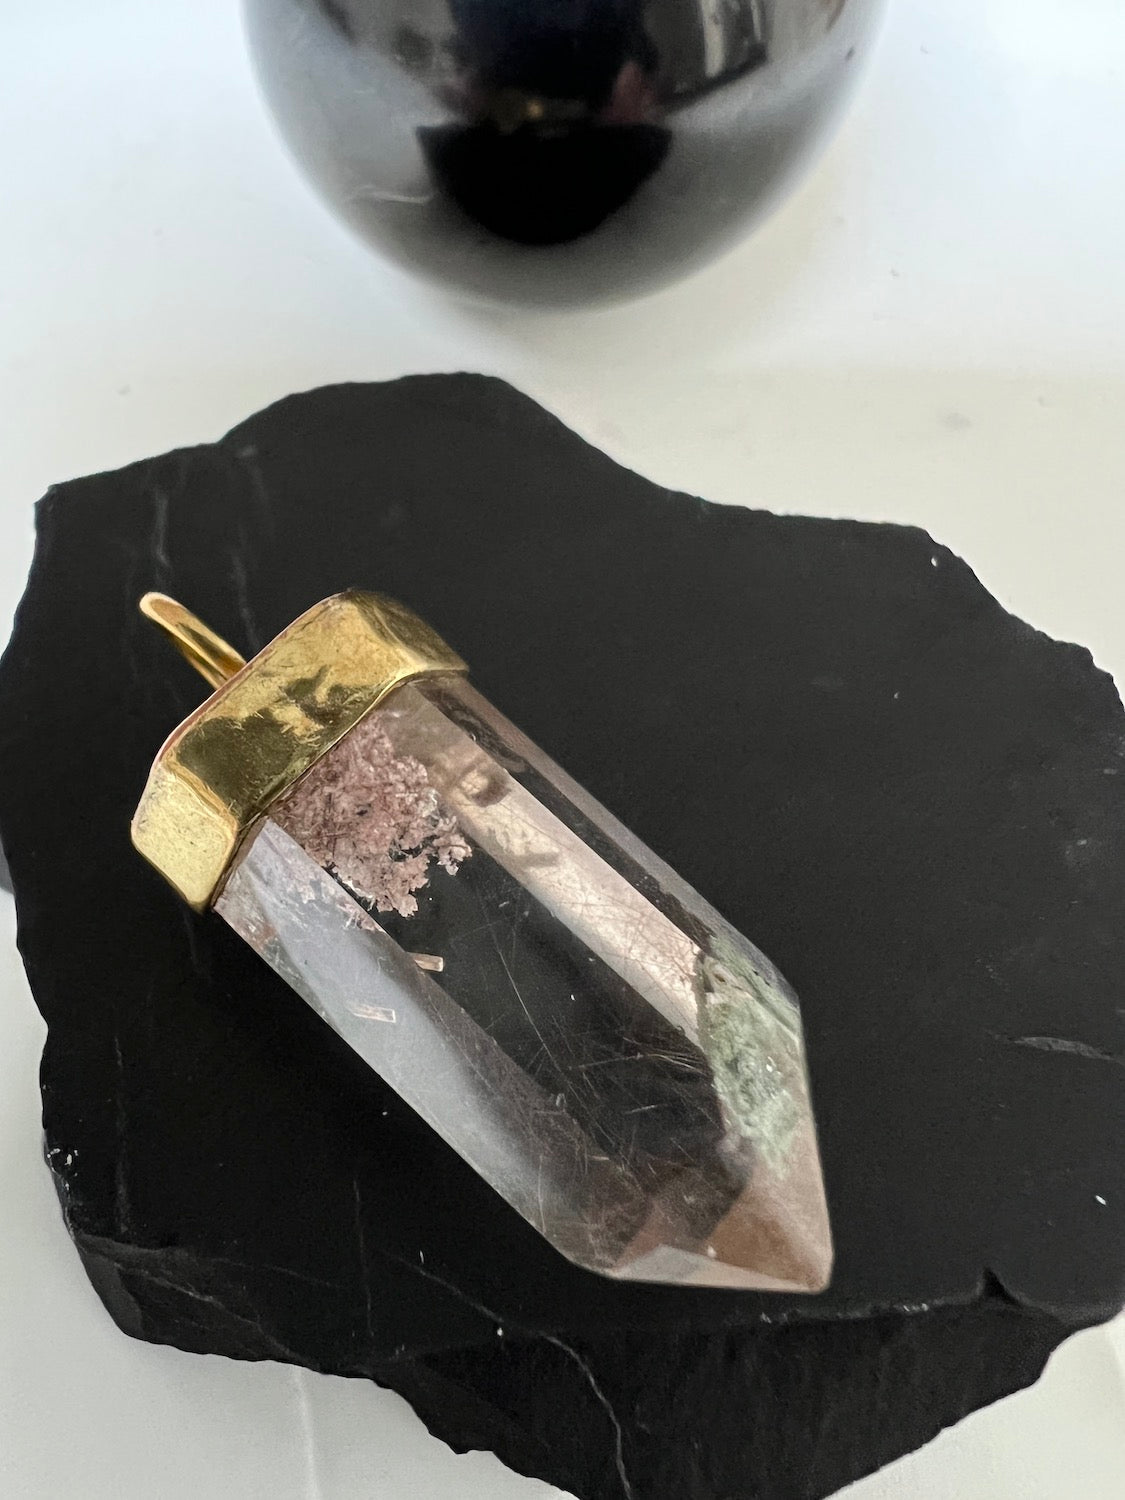 Unique Crystal with chlorite and Moss  inclusions